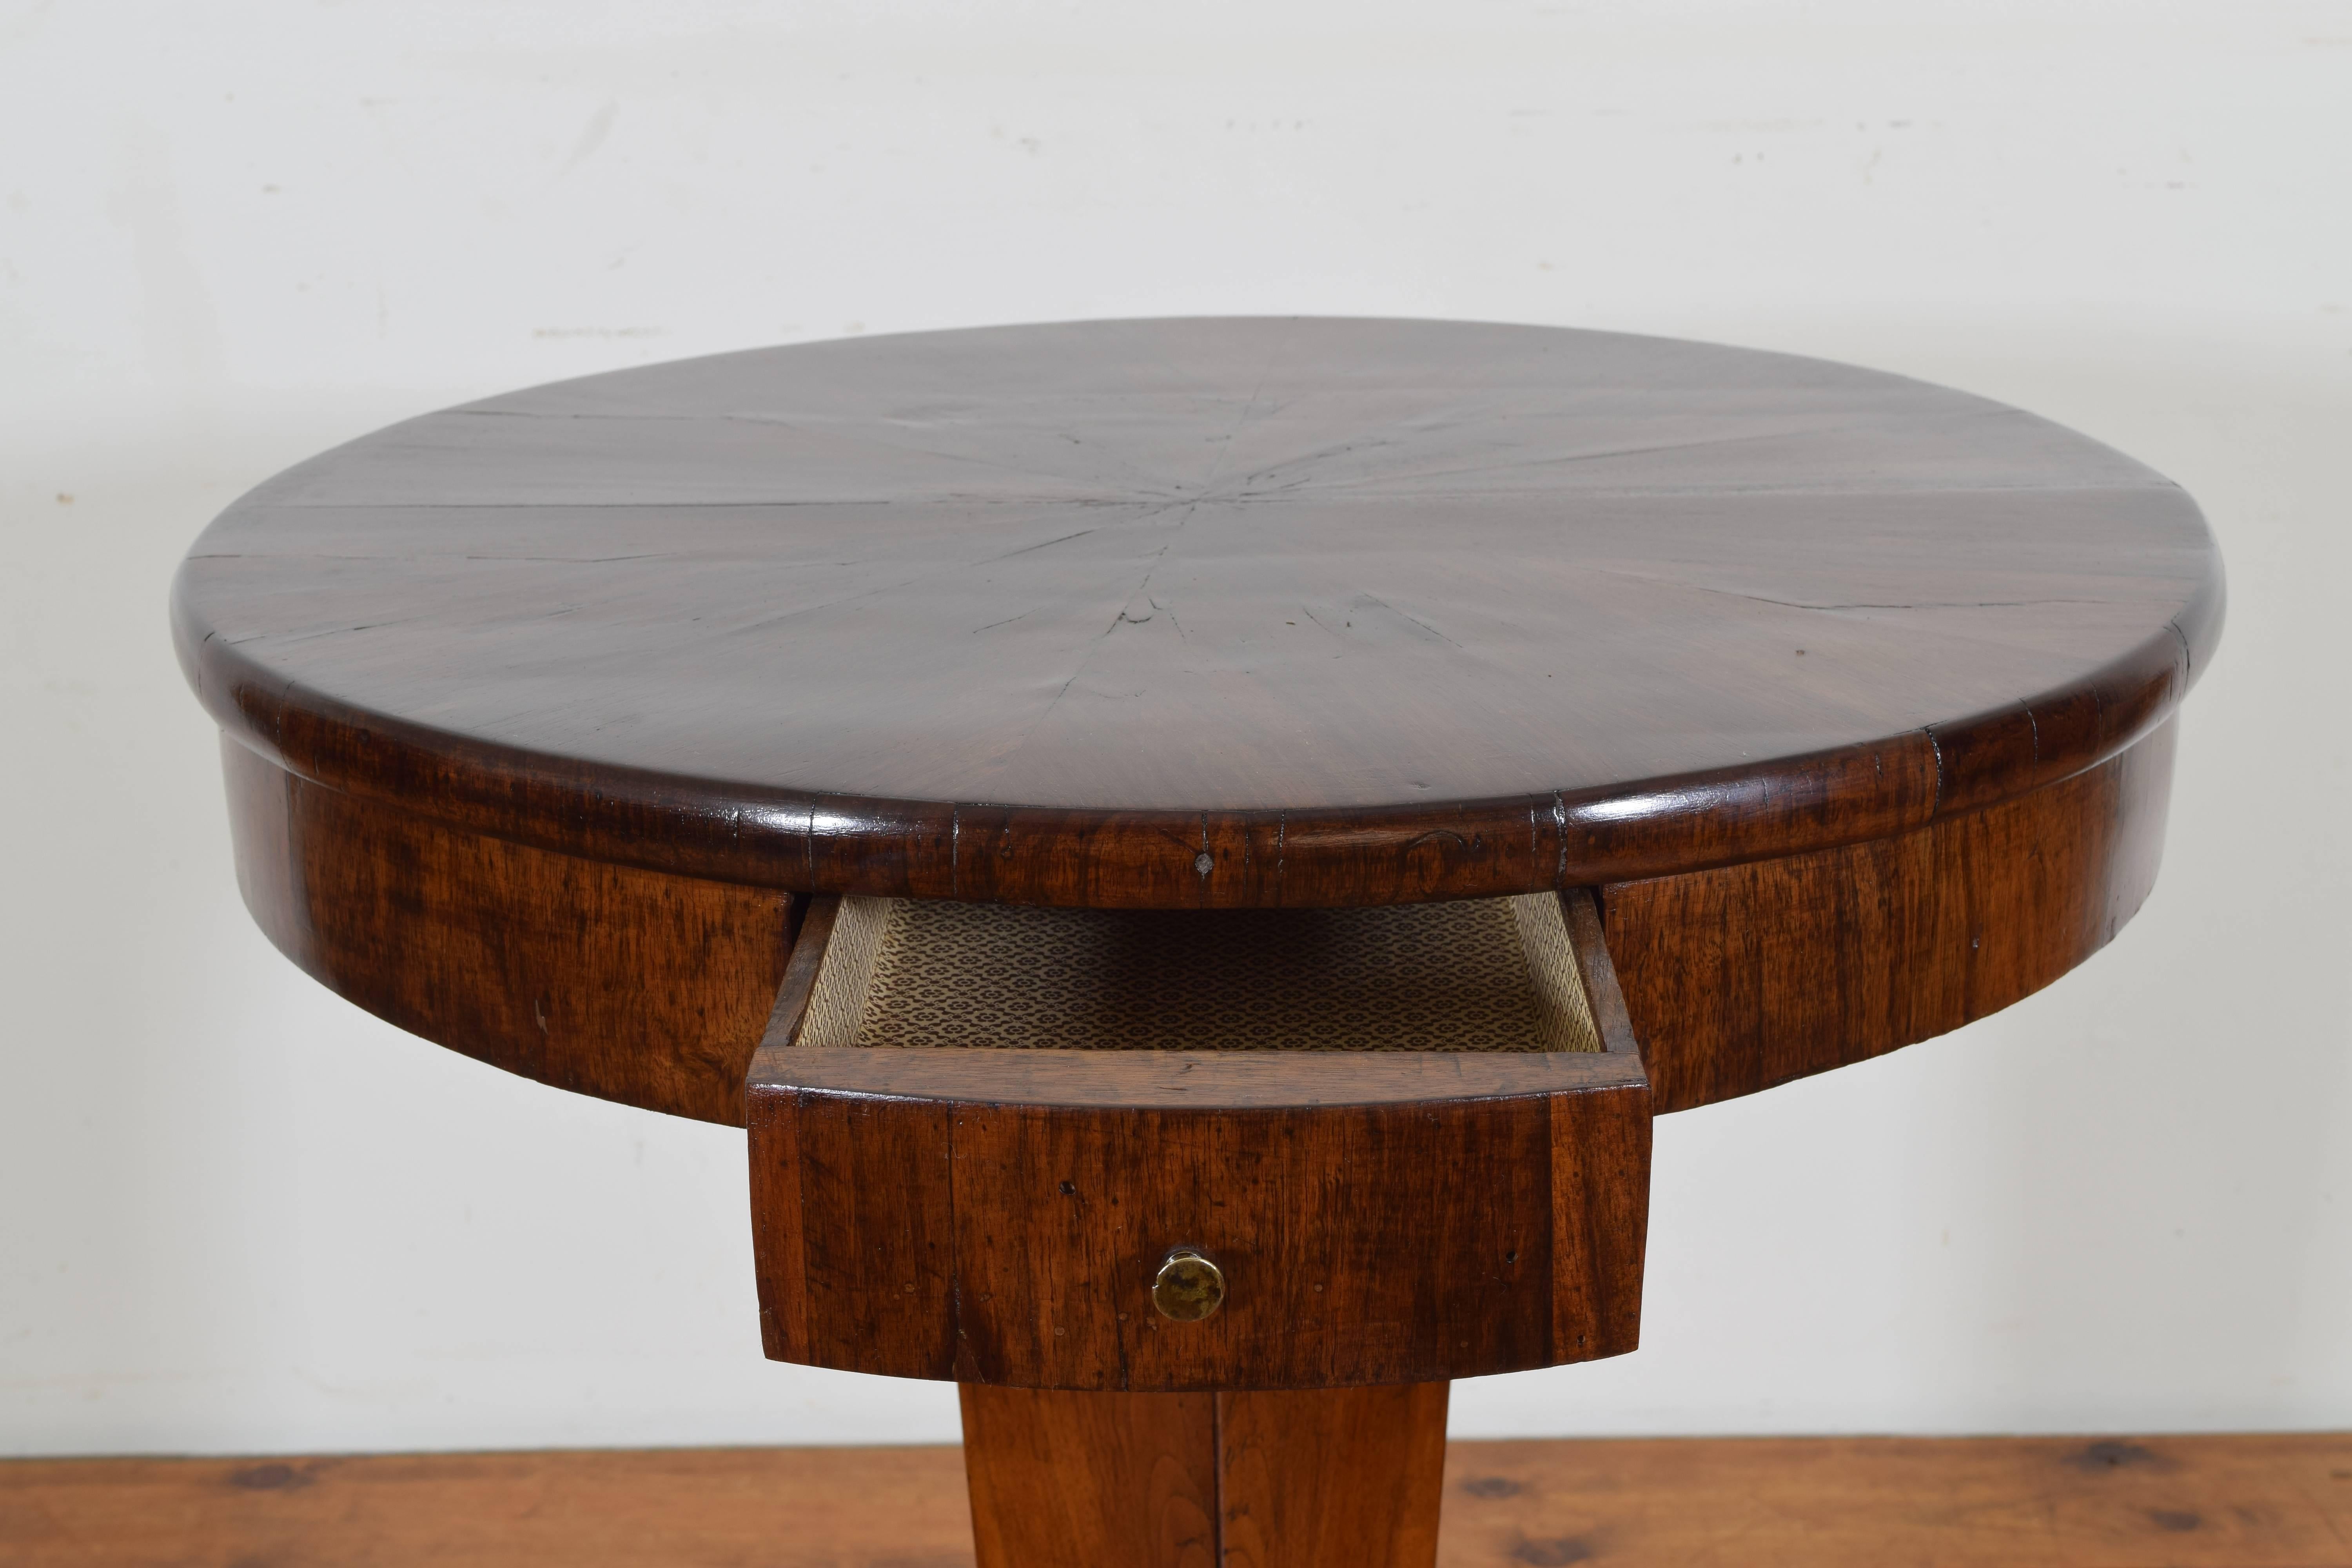 From the second quarter of the 19th century, the table covered in mahogany veneers, the round top housing one-drawer and raised on a tapering hexagonal pedestal atop a tripartite base raised on flattened feet.